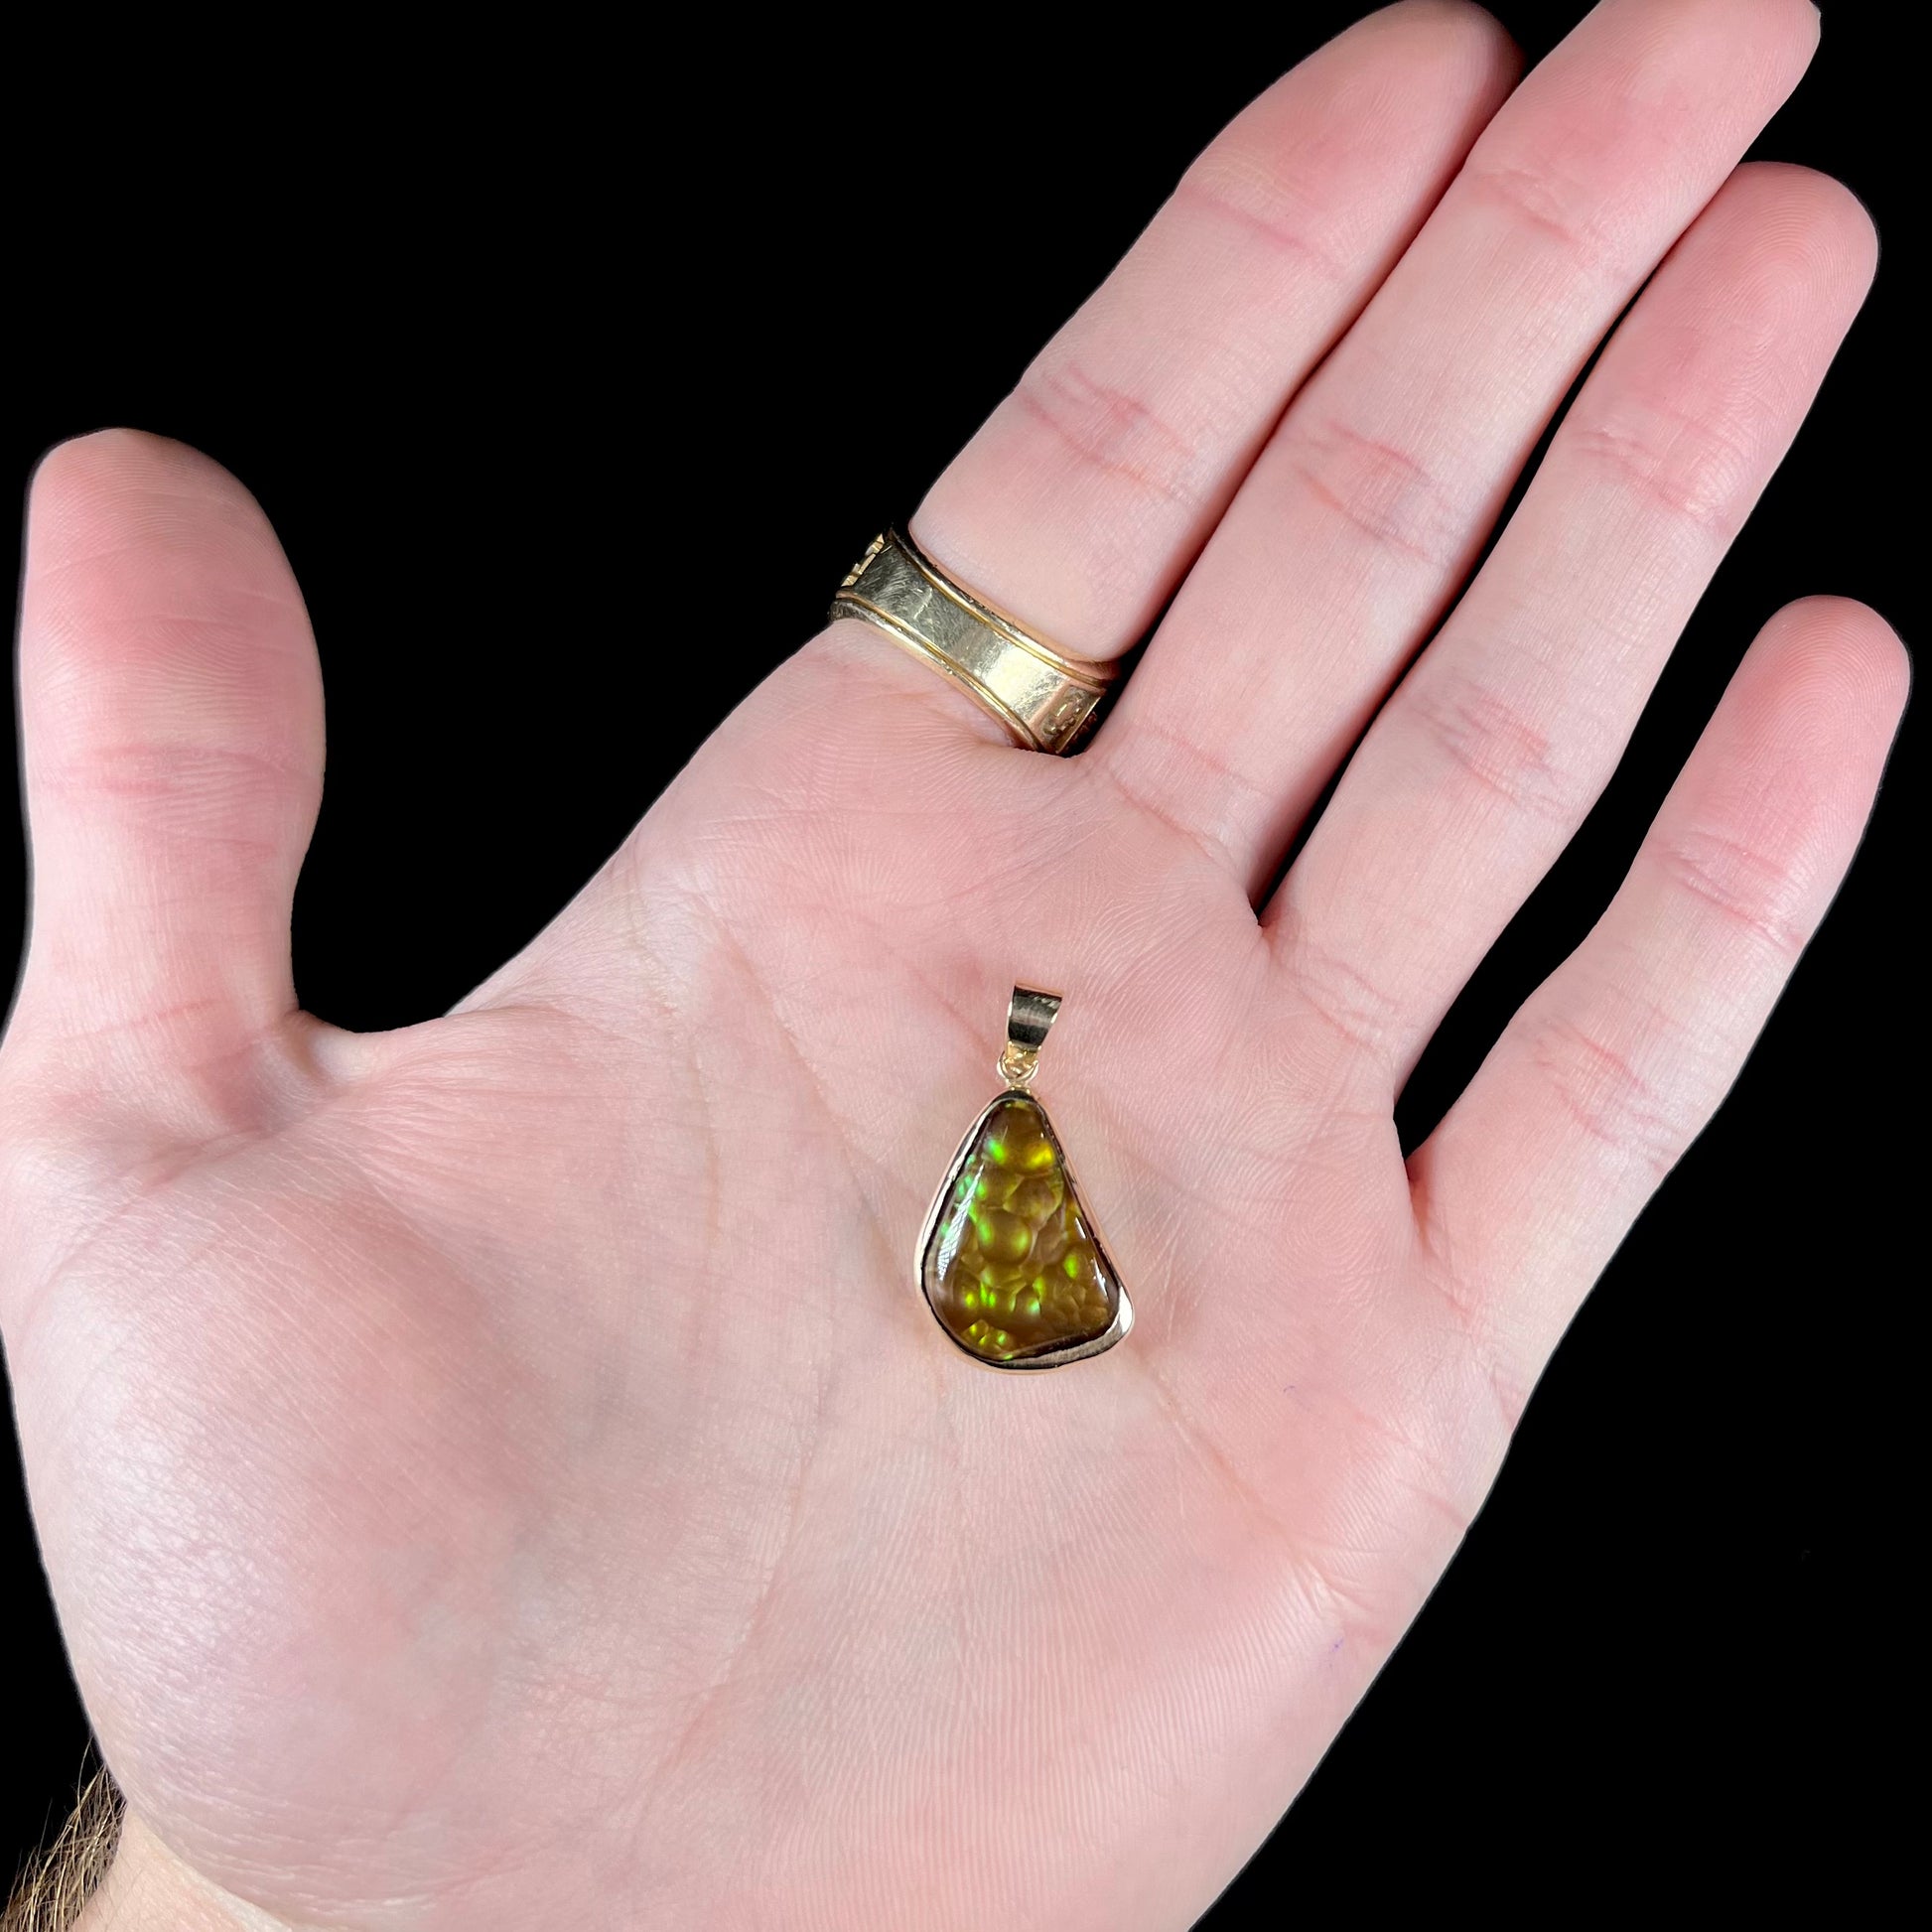 A handmade yellow gold solitaire pendant set with a green fire agate stone from Mexico.